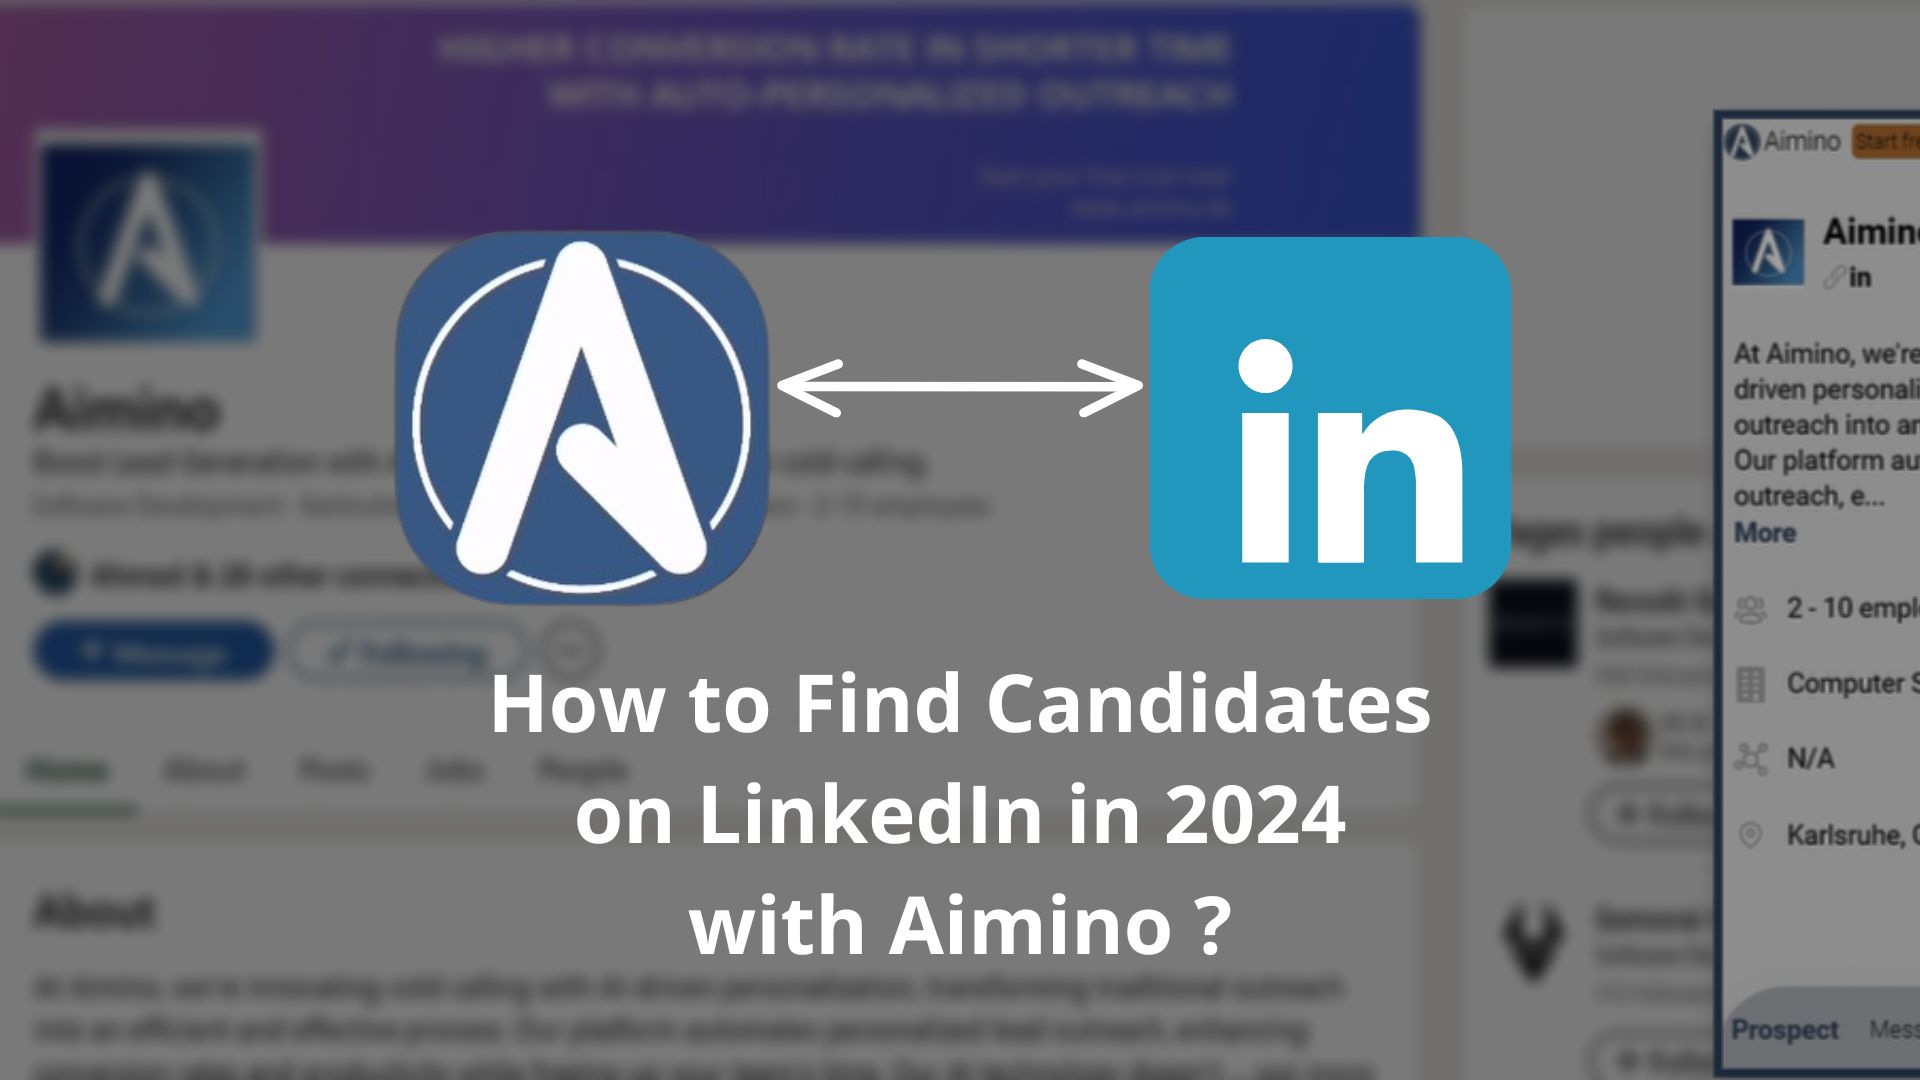 How to Find Candidates on LinkedIn in 2024 with Aimino ?